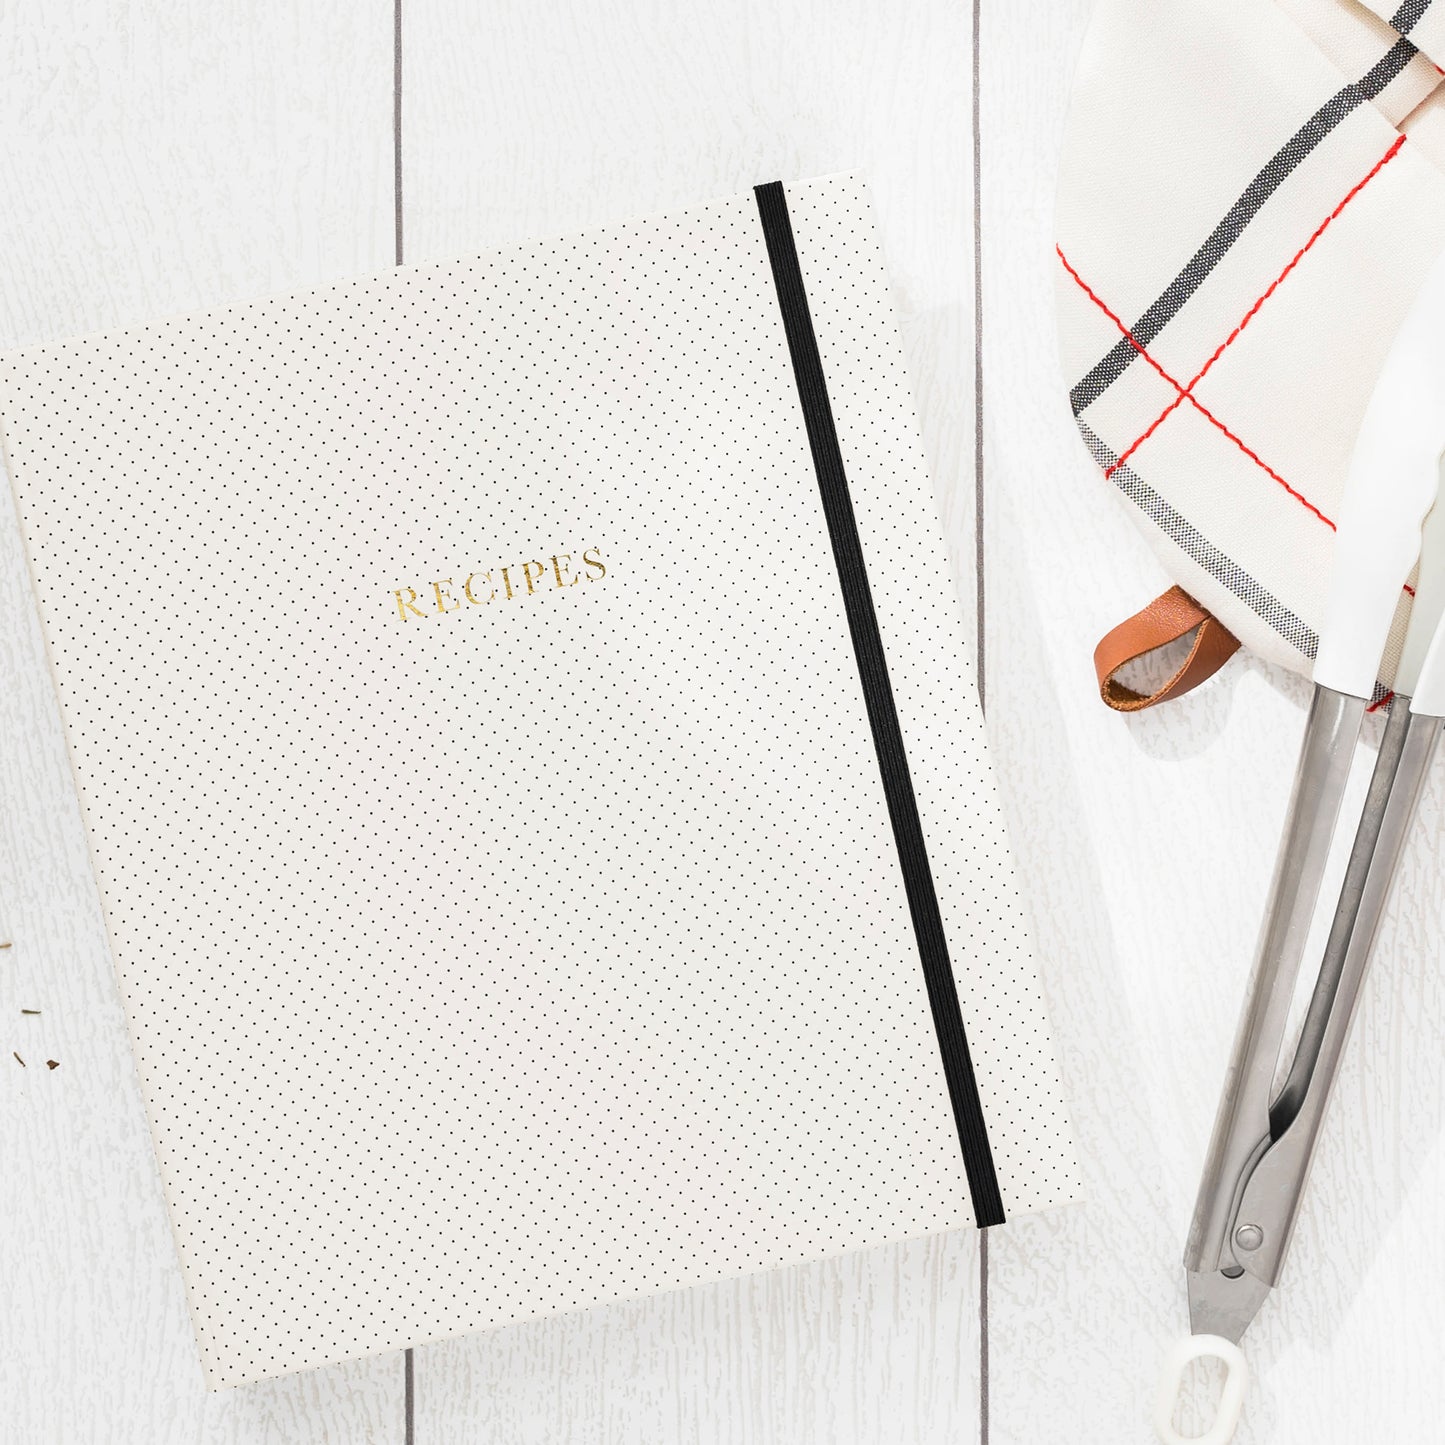 recipe book with tongs and linen towel